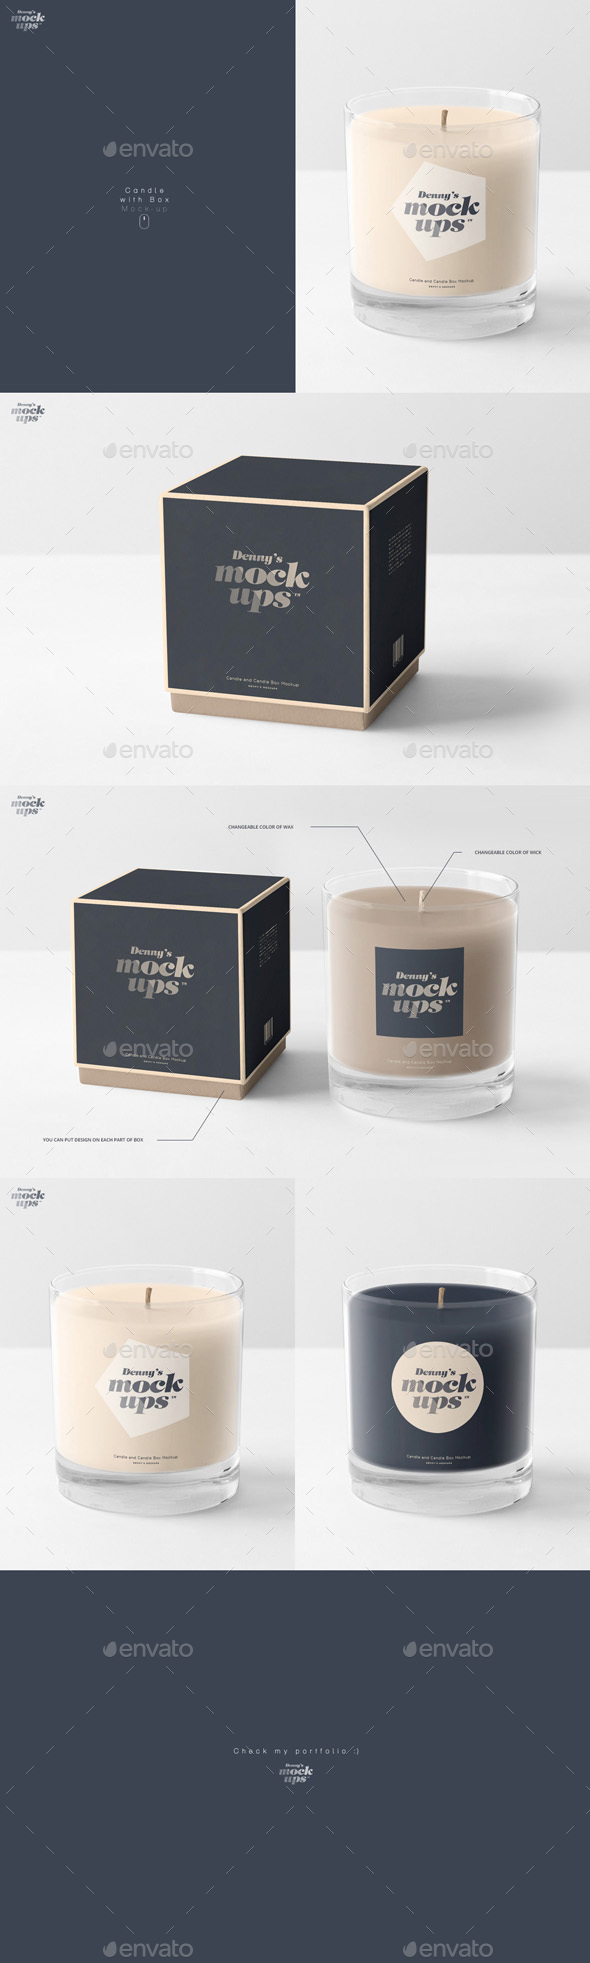 Download Candle Mockup Graphics Designs Templates From Graphicriver